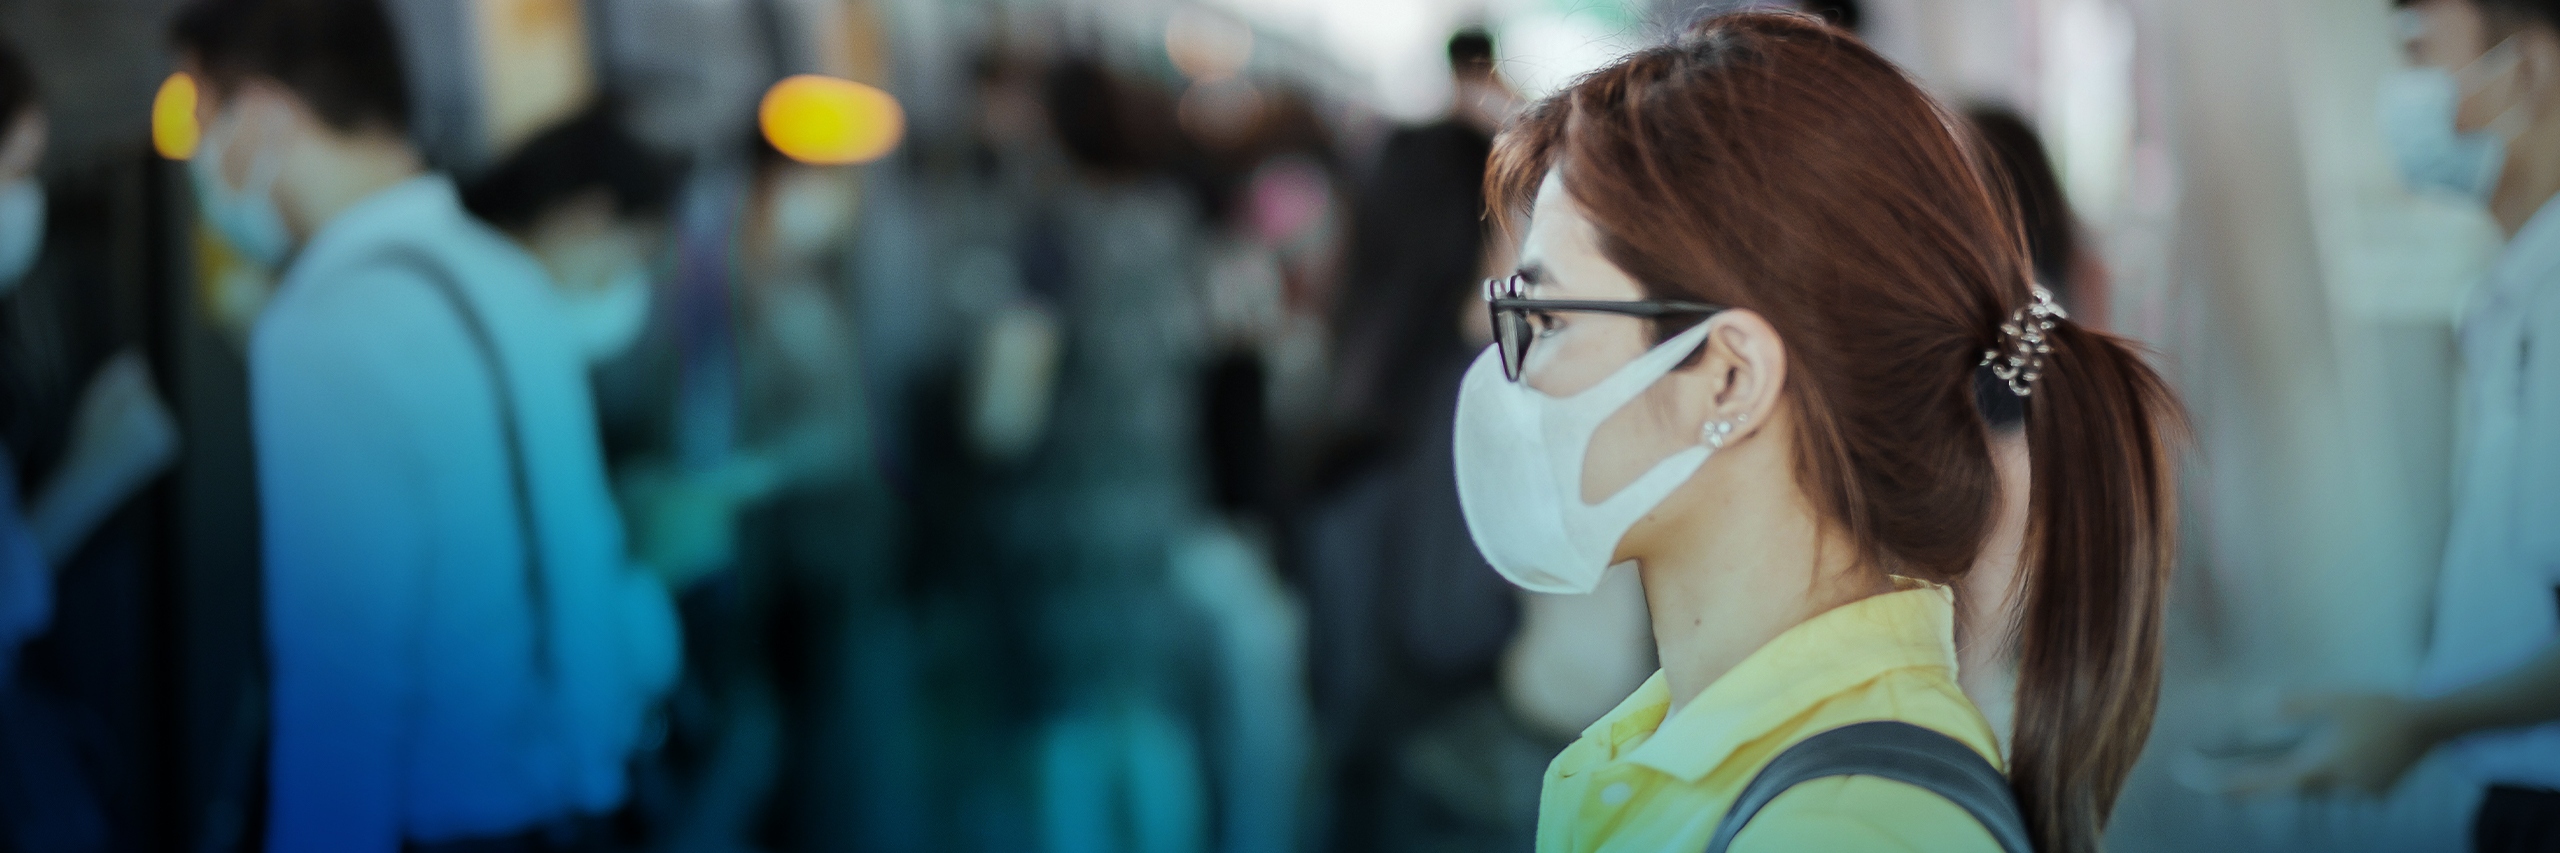 woman wearing protection mask